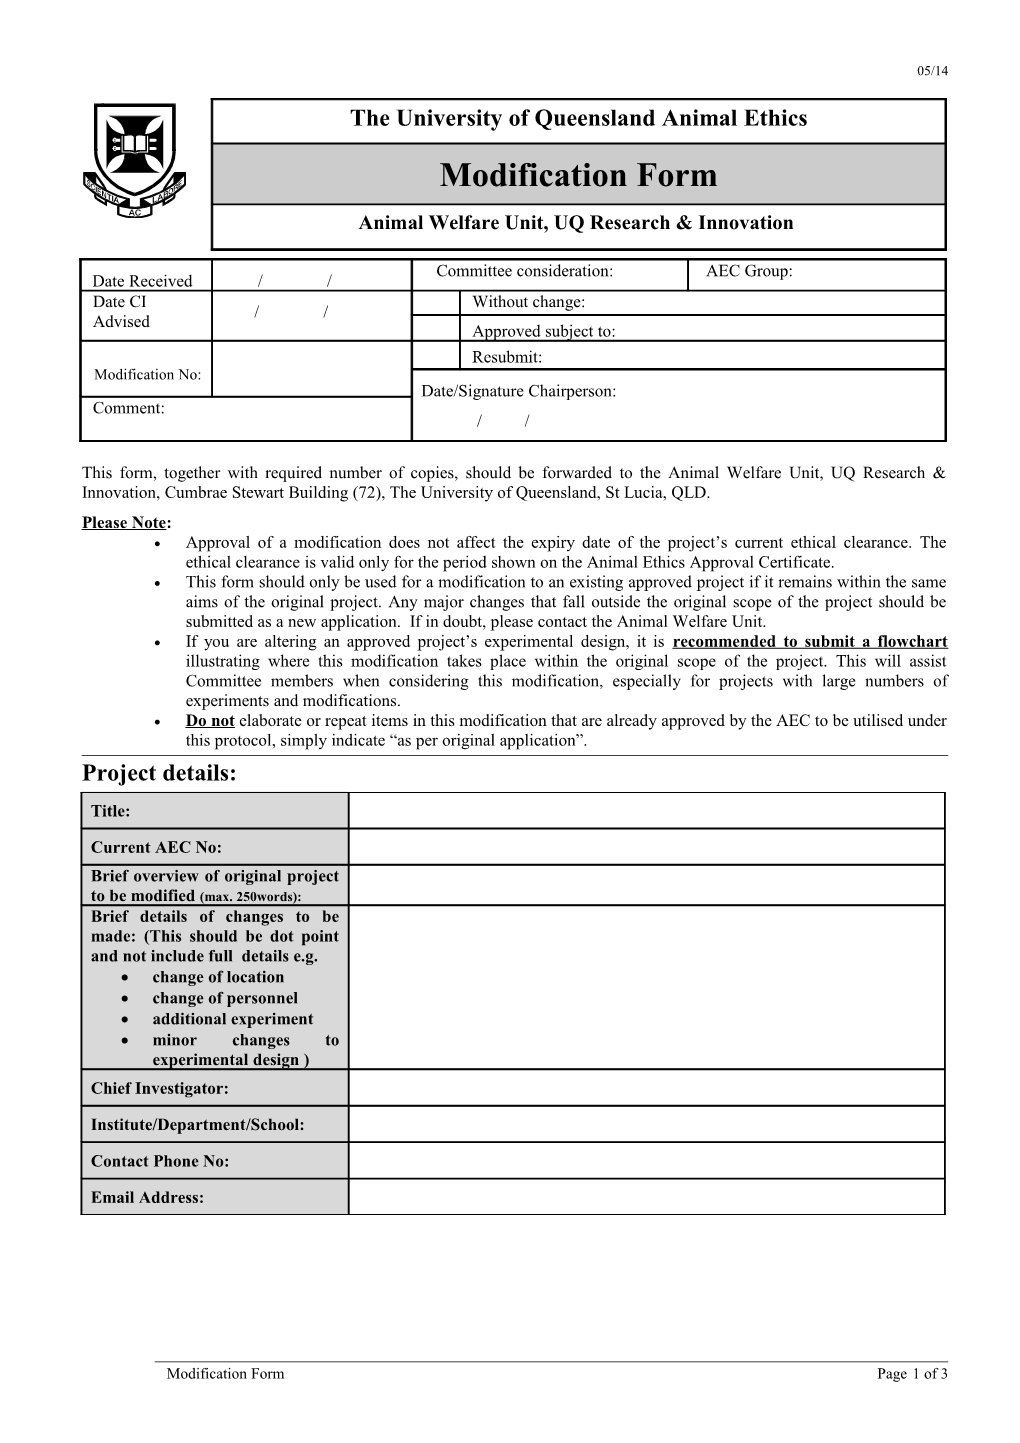 Animal Ethics Committee Modification Form